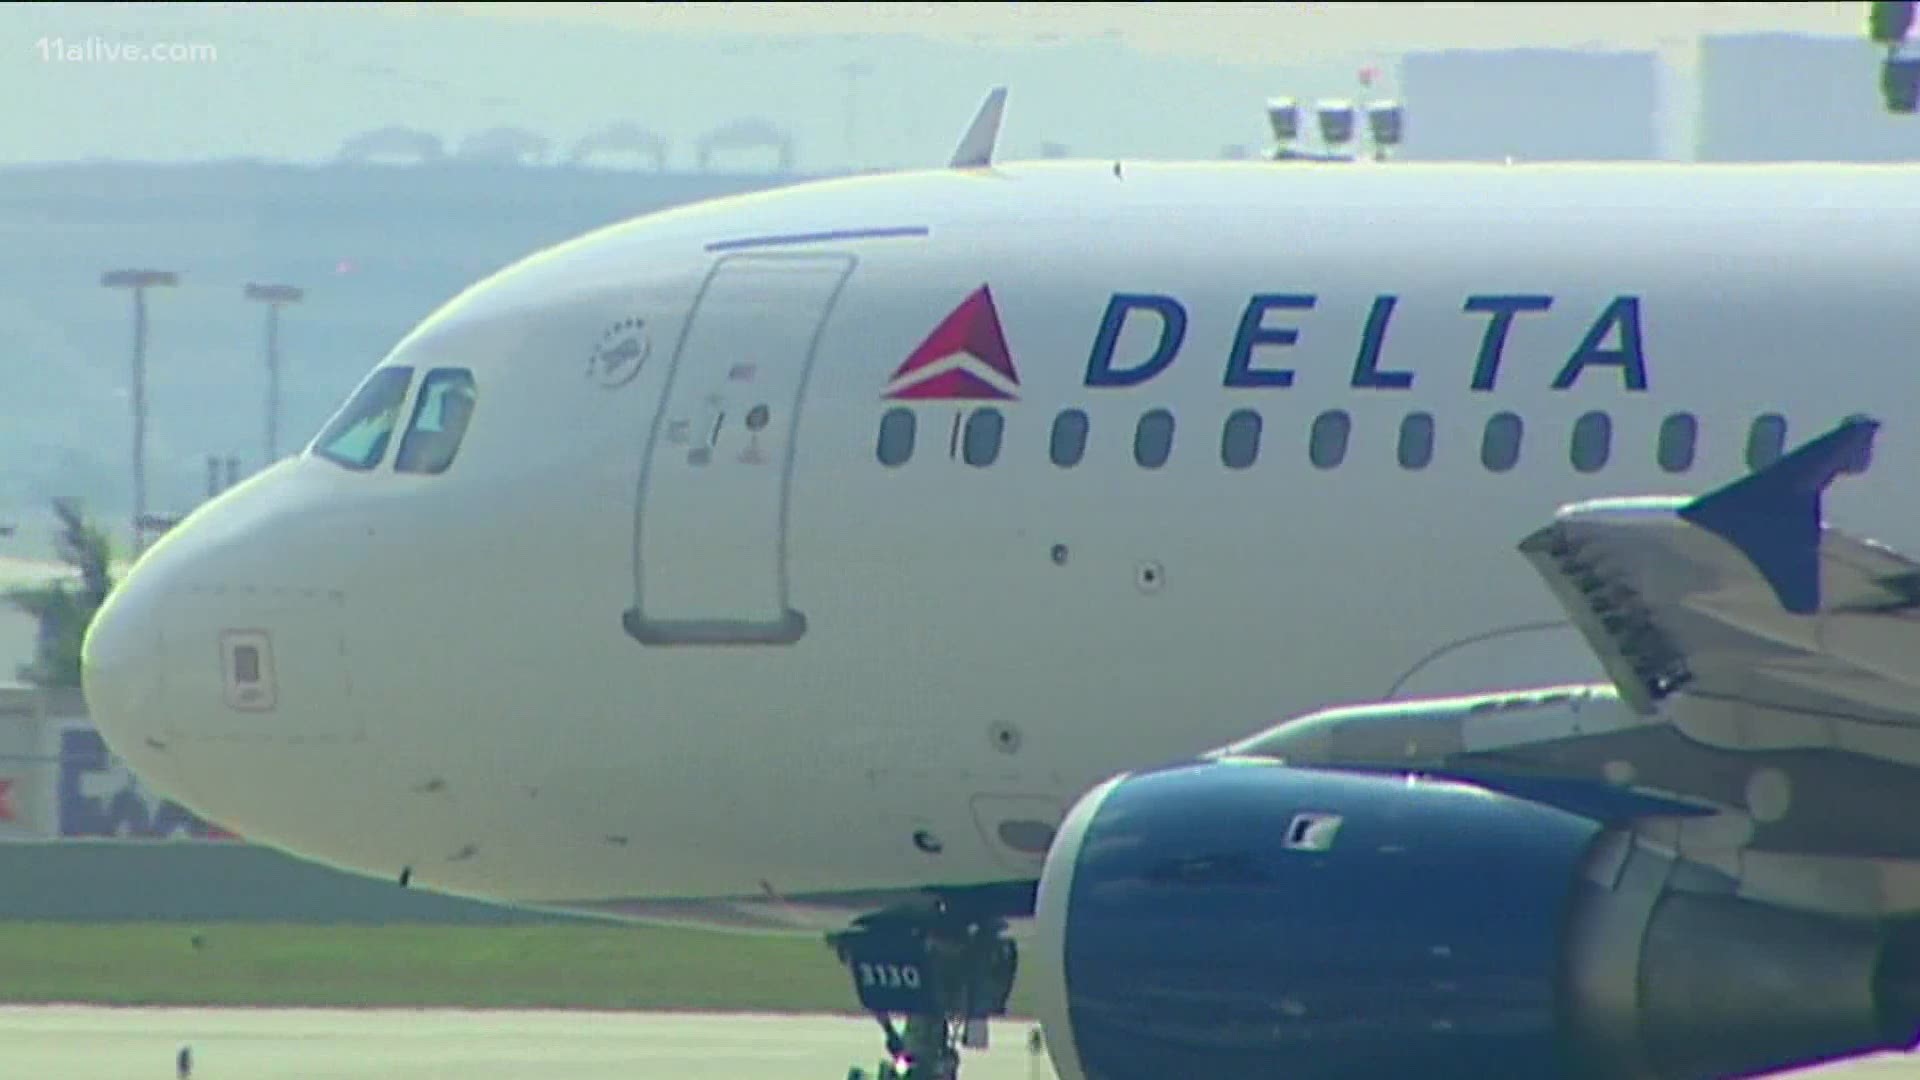 The airline has already retired dozens of planes to cut costs.